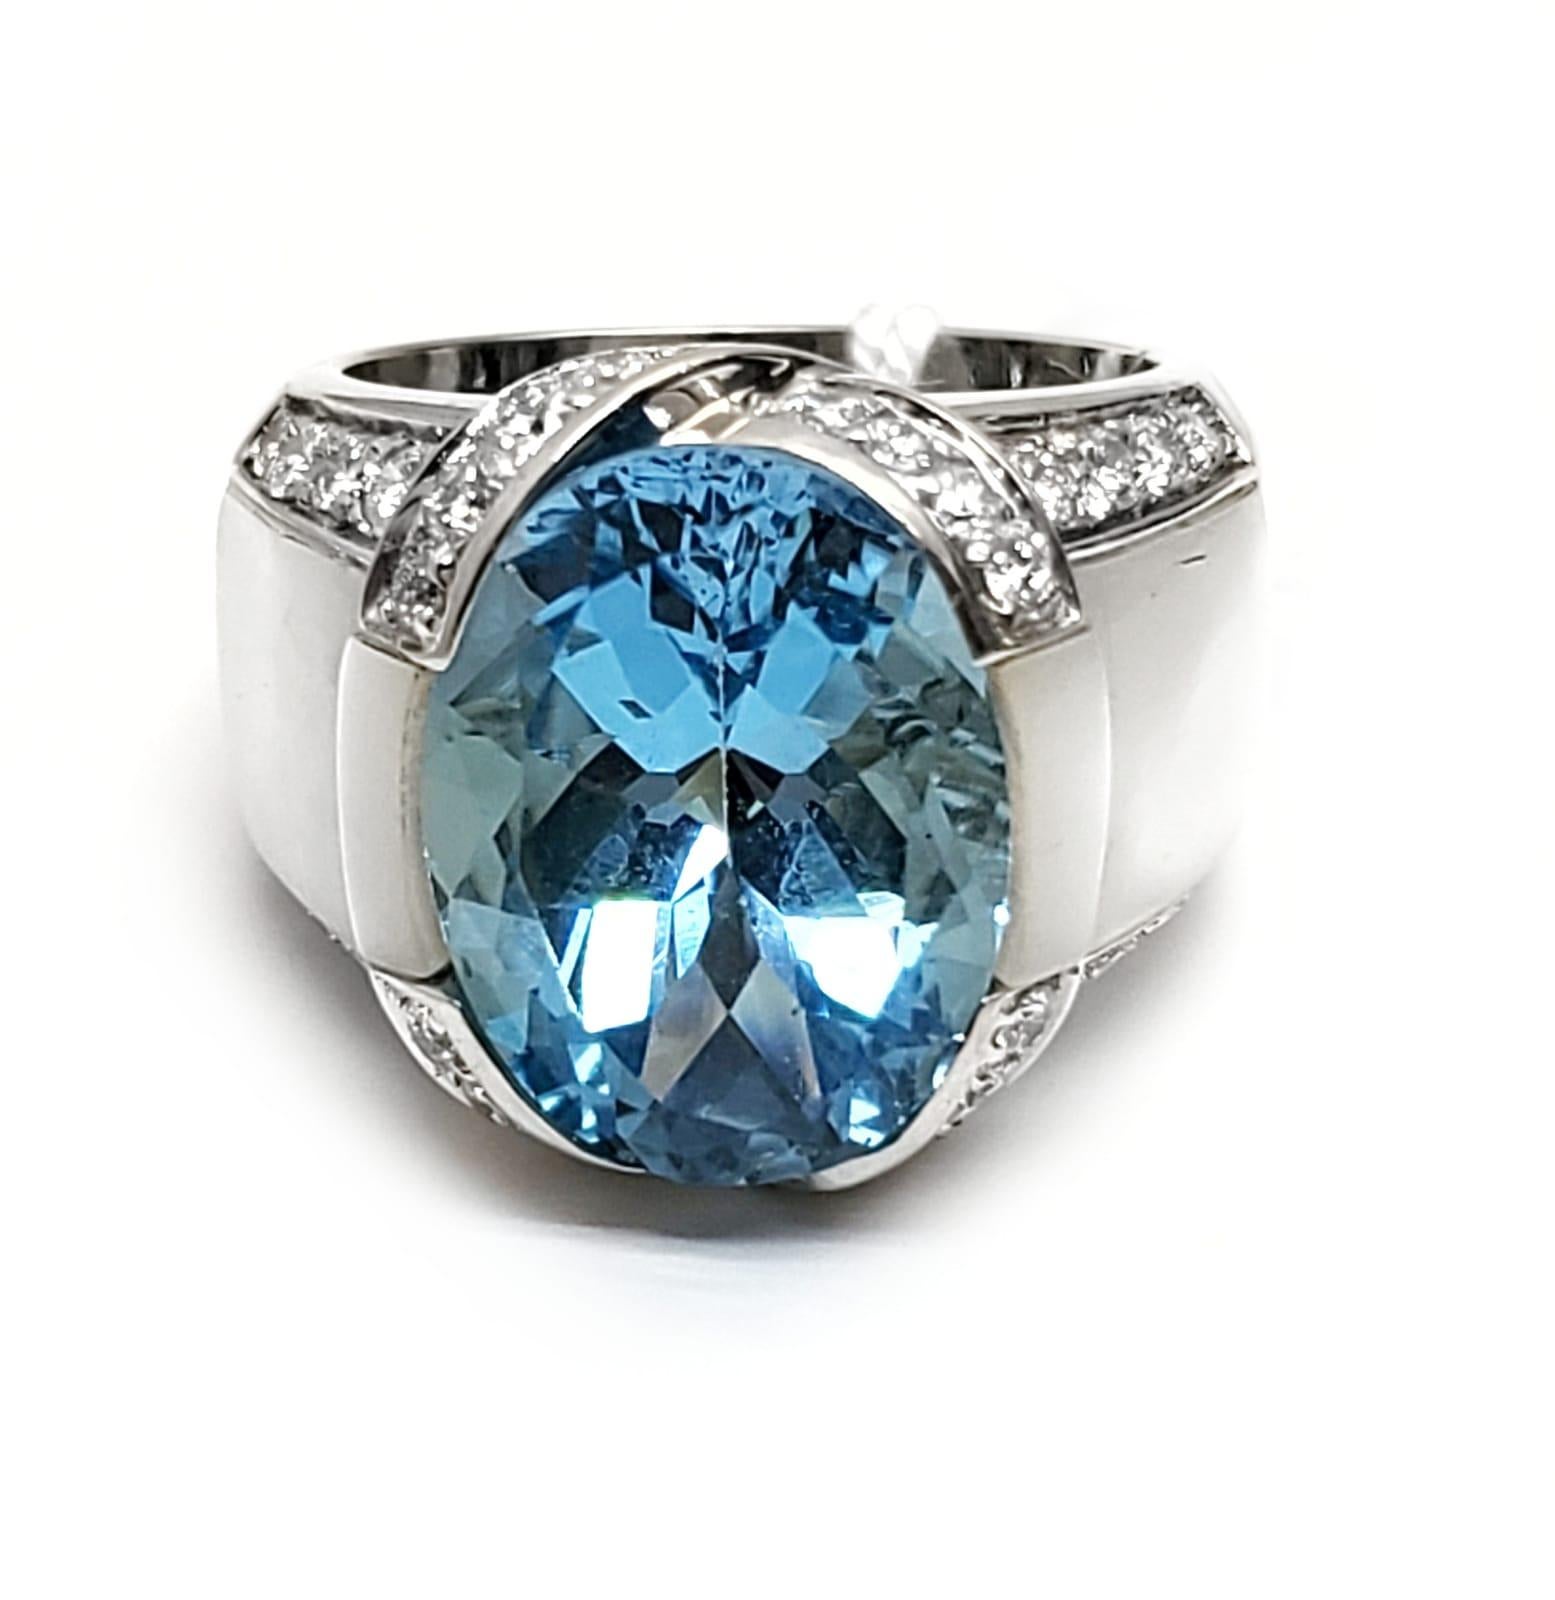 Mixed Cut Andreoli Diamond Blue Topaz Mother of Pearl 18 Karat White Gold Ring For Sale